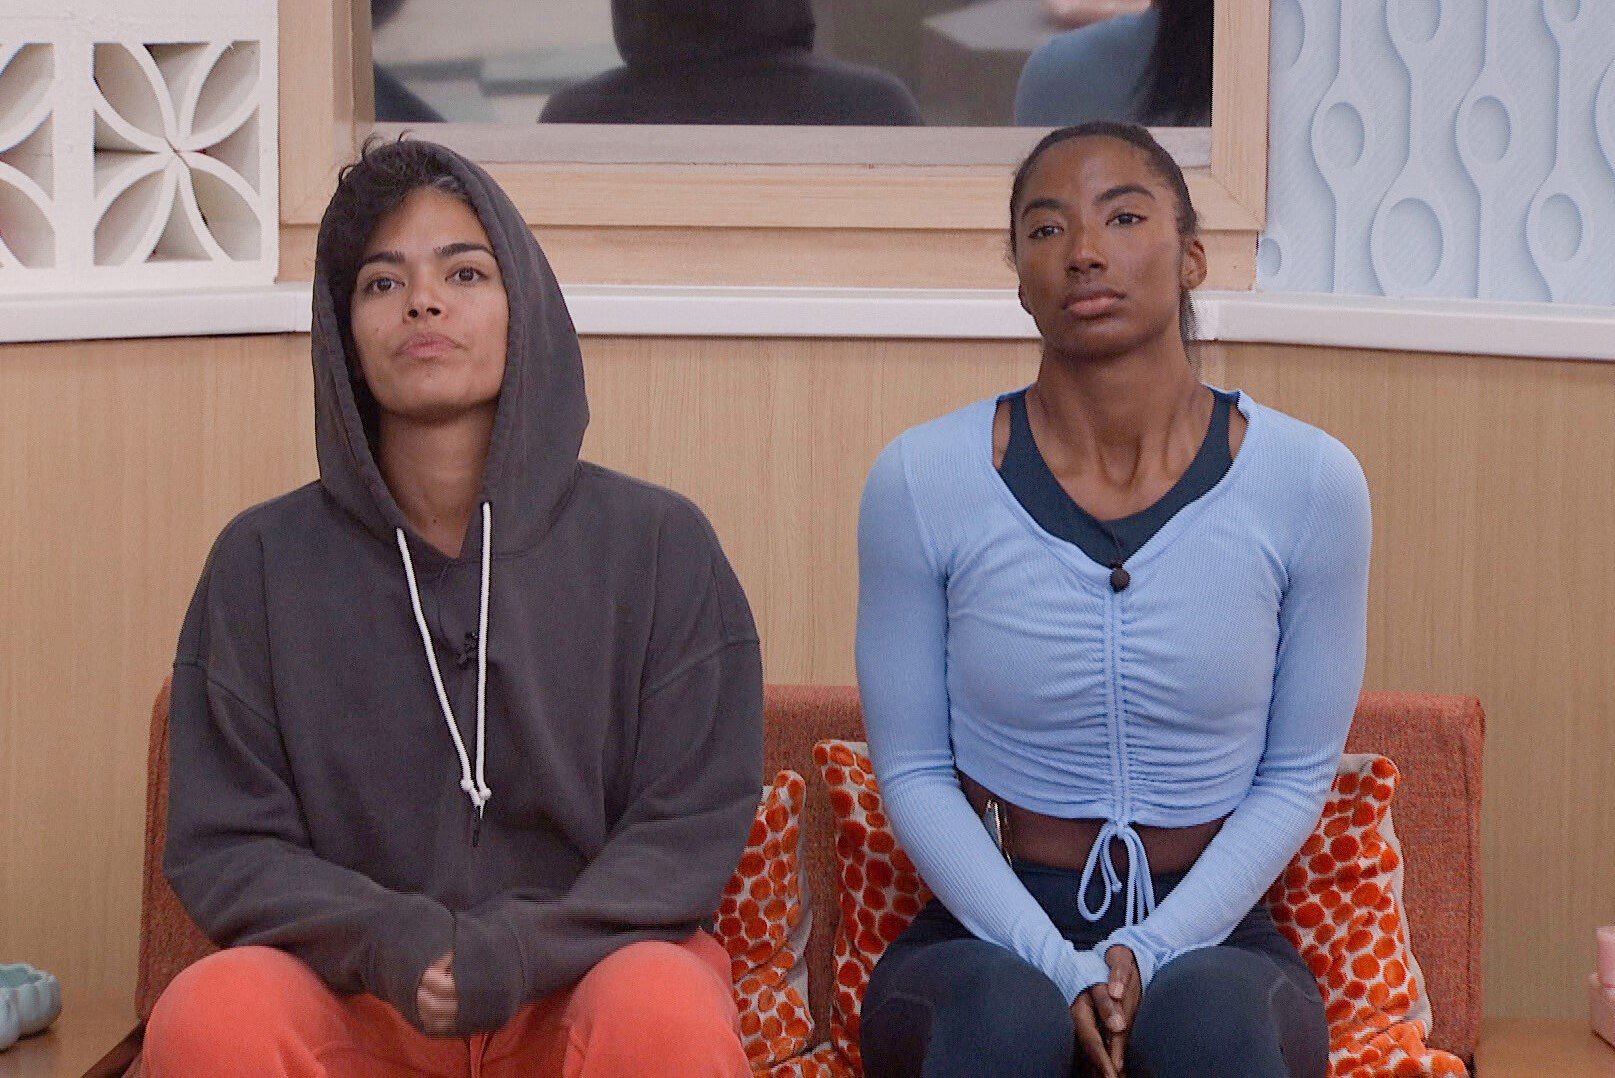 According to 'Big Brother 24' spoilers, Nicole Layog and Taylor Hale are on the block during week four. The two houseguests sit in the elimination chairs. Nicole wears a gray hoodie and orange pants. Taylor wears a light blue long-sleeved shirt and gray pants.